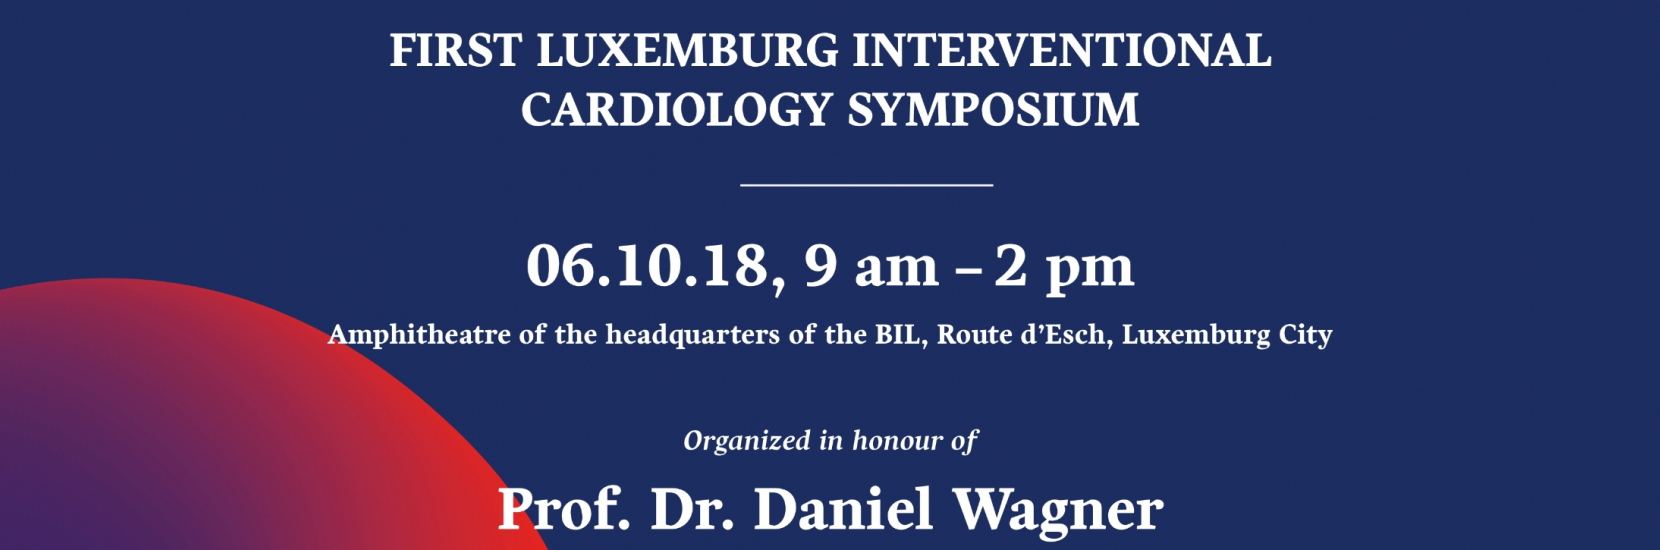 First Luxemburg Interventional Cardiology Symposium